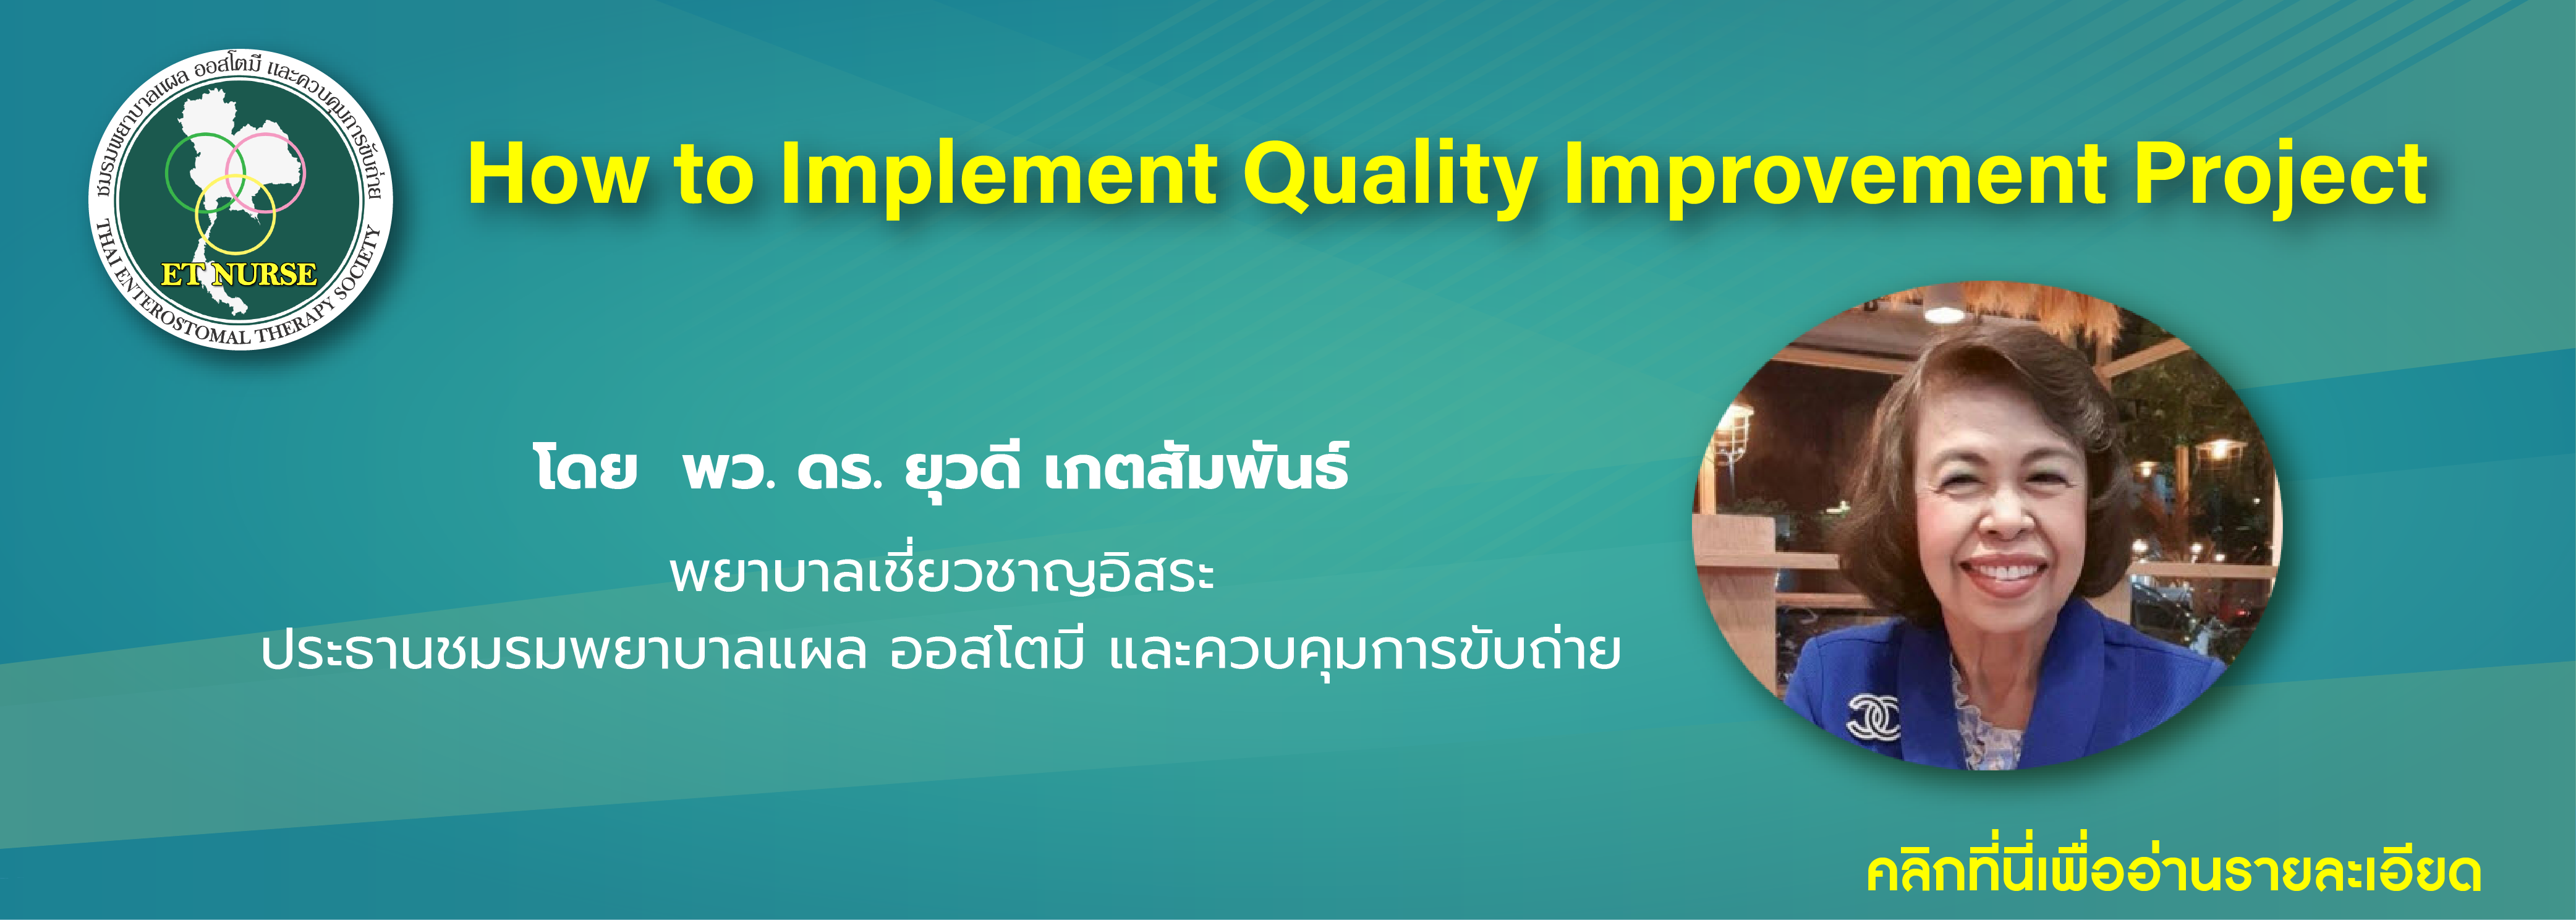 How to Implement Quality Improvement Project